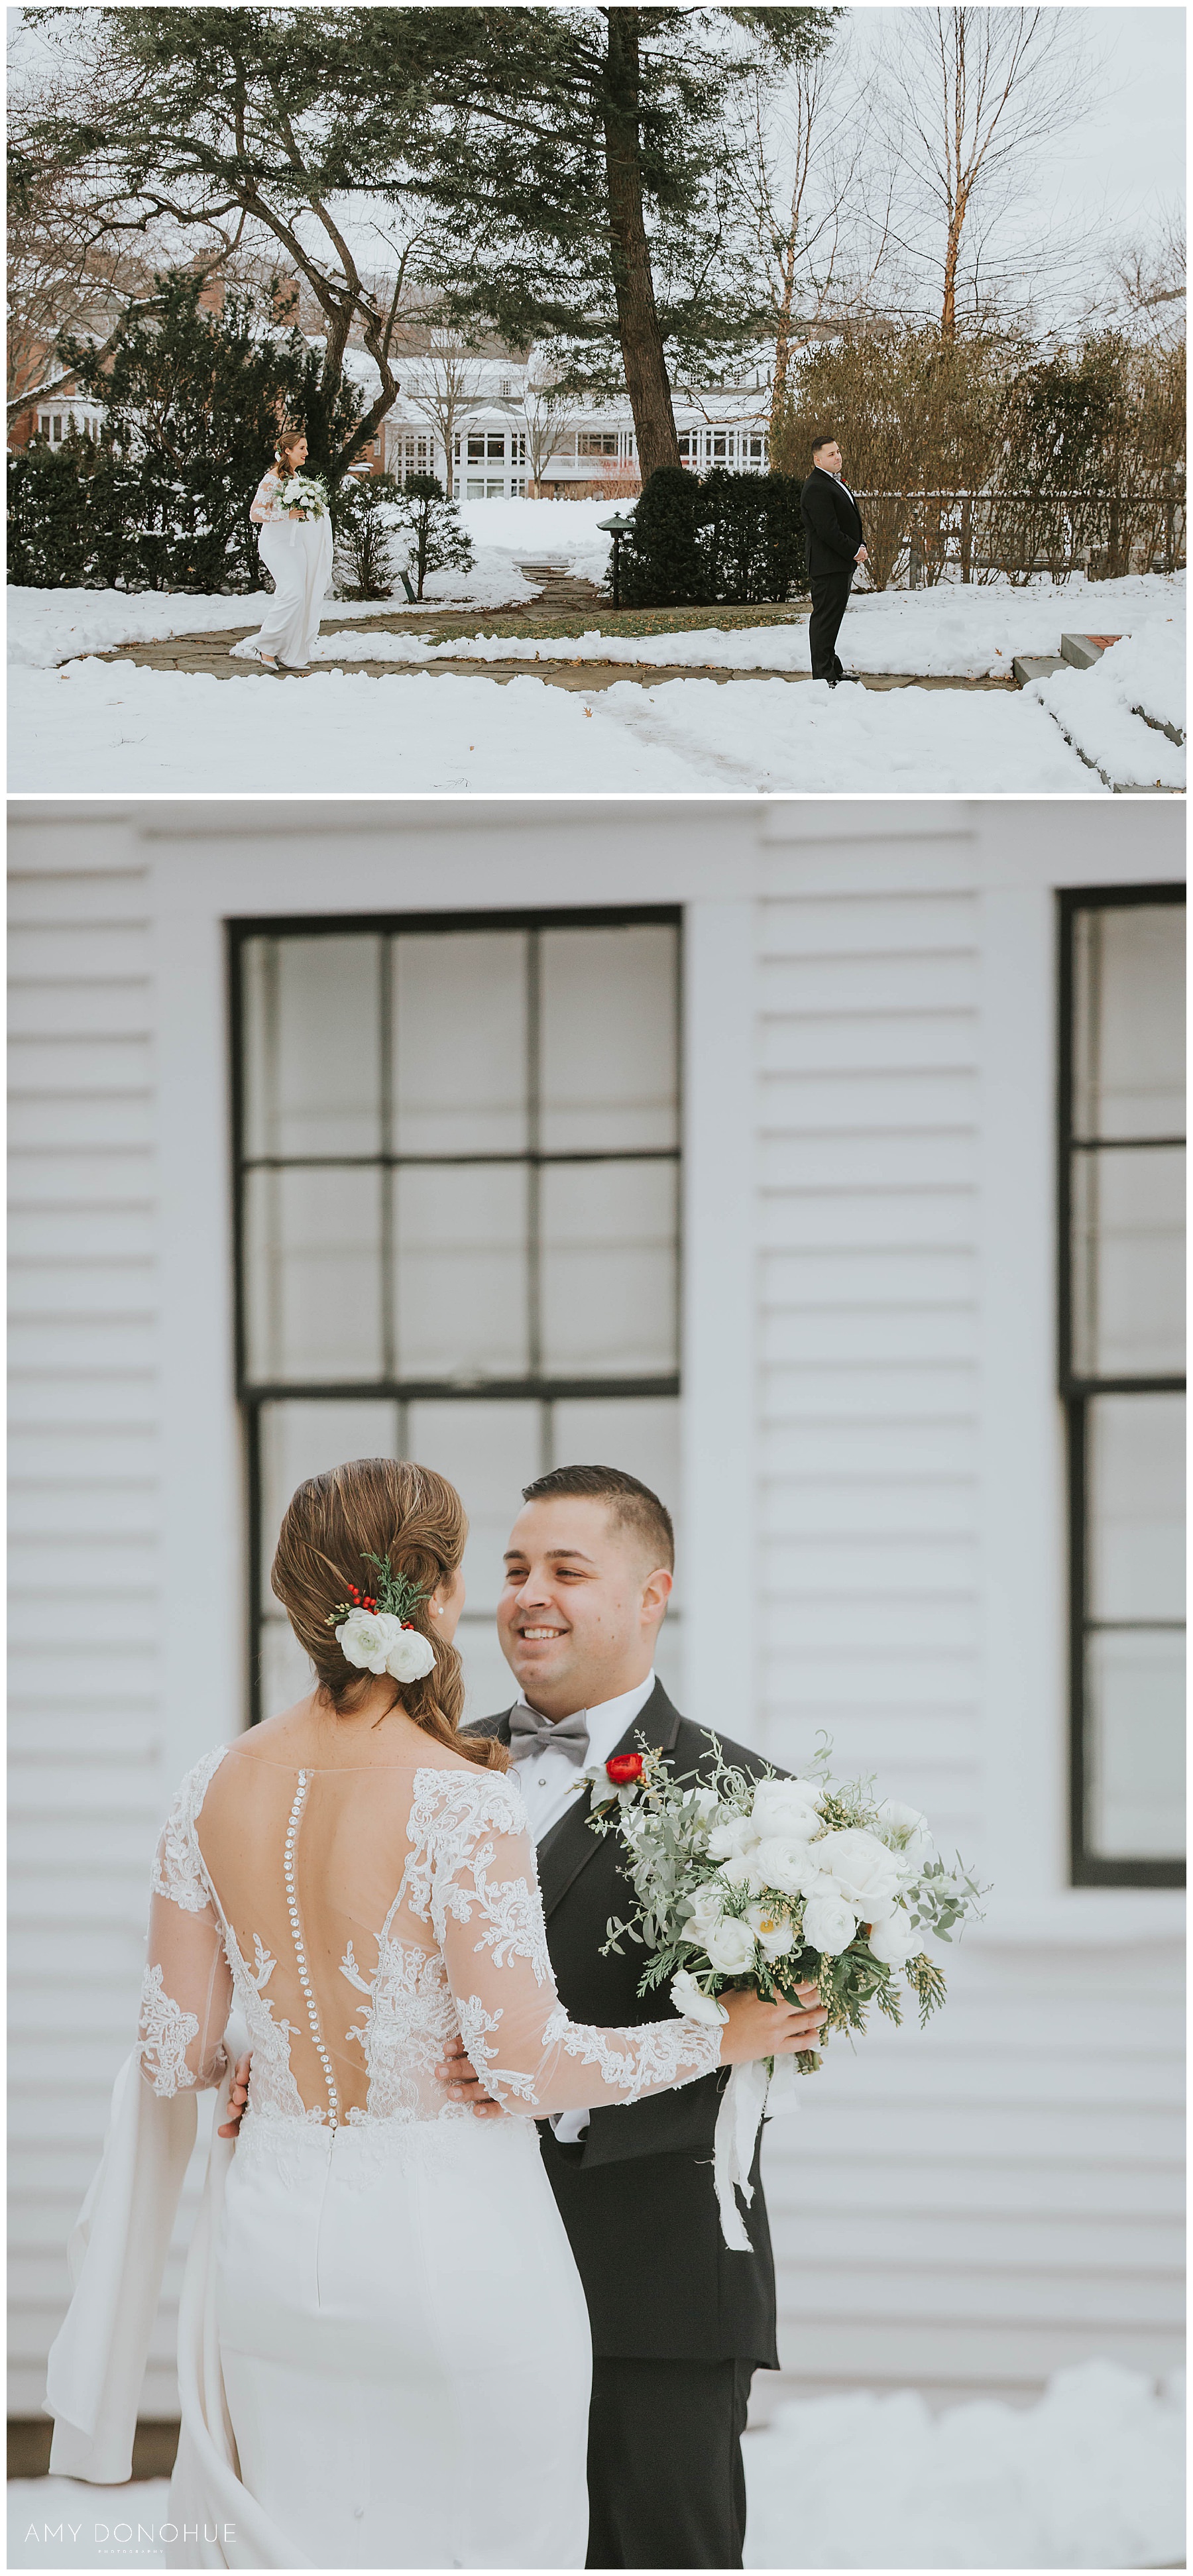 Authentic First Look Portraits | Woodstock Inn & Resort | VT Wedding Photographer | © Amy Donohue Photography